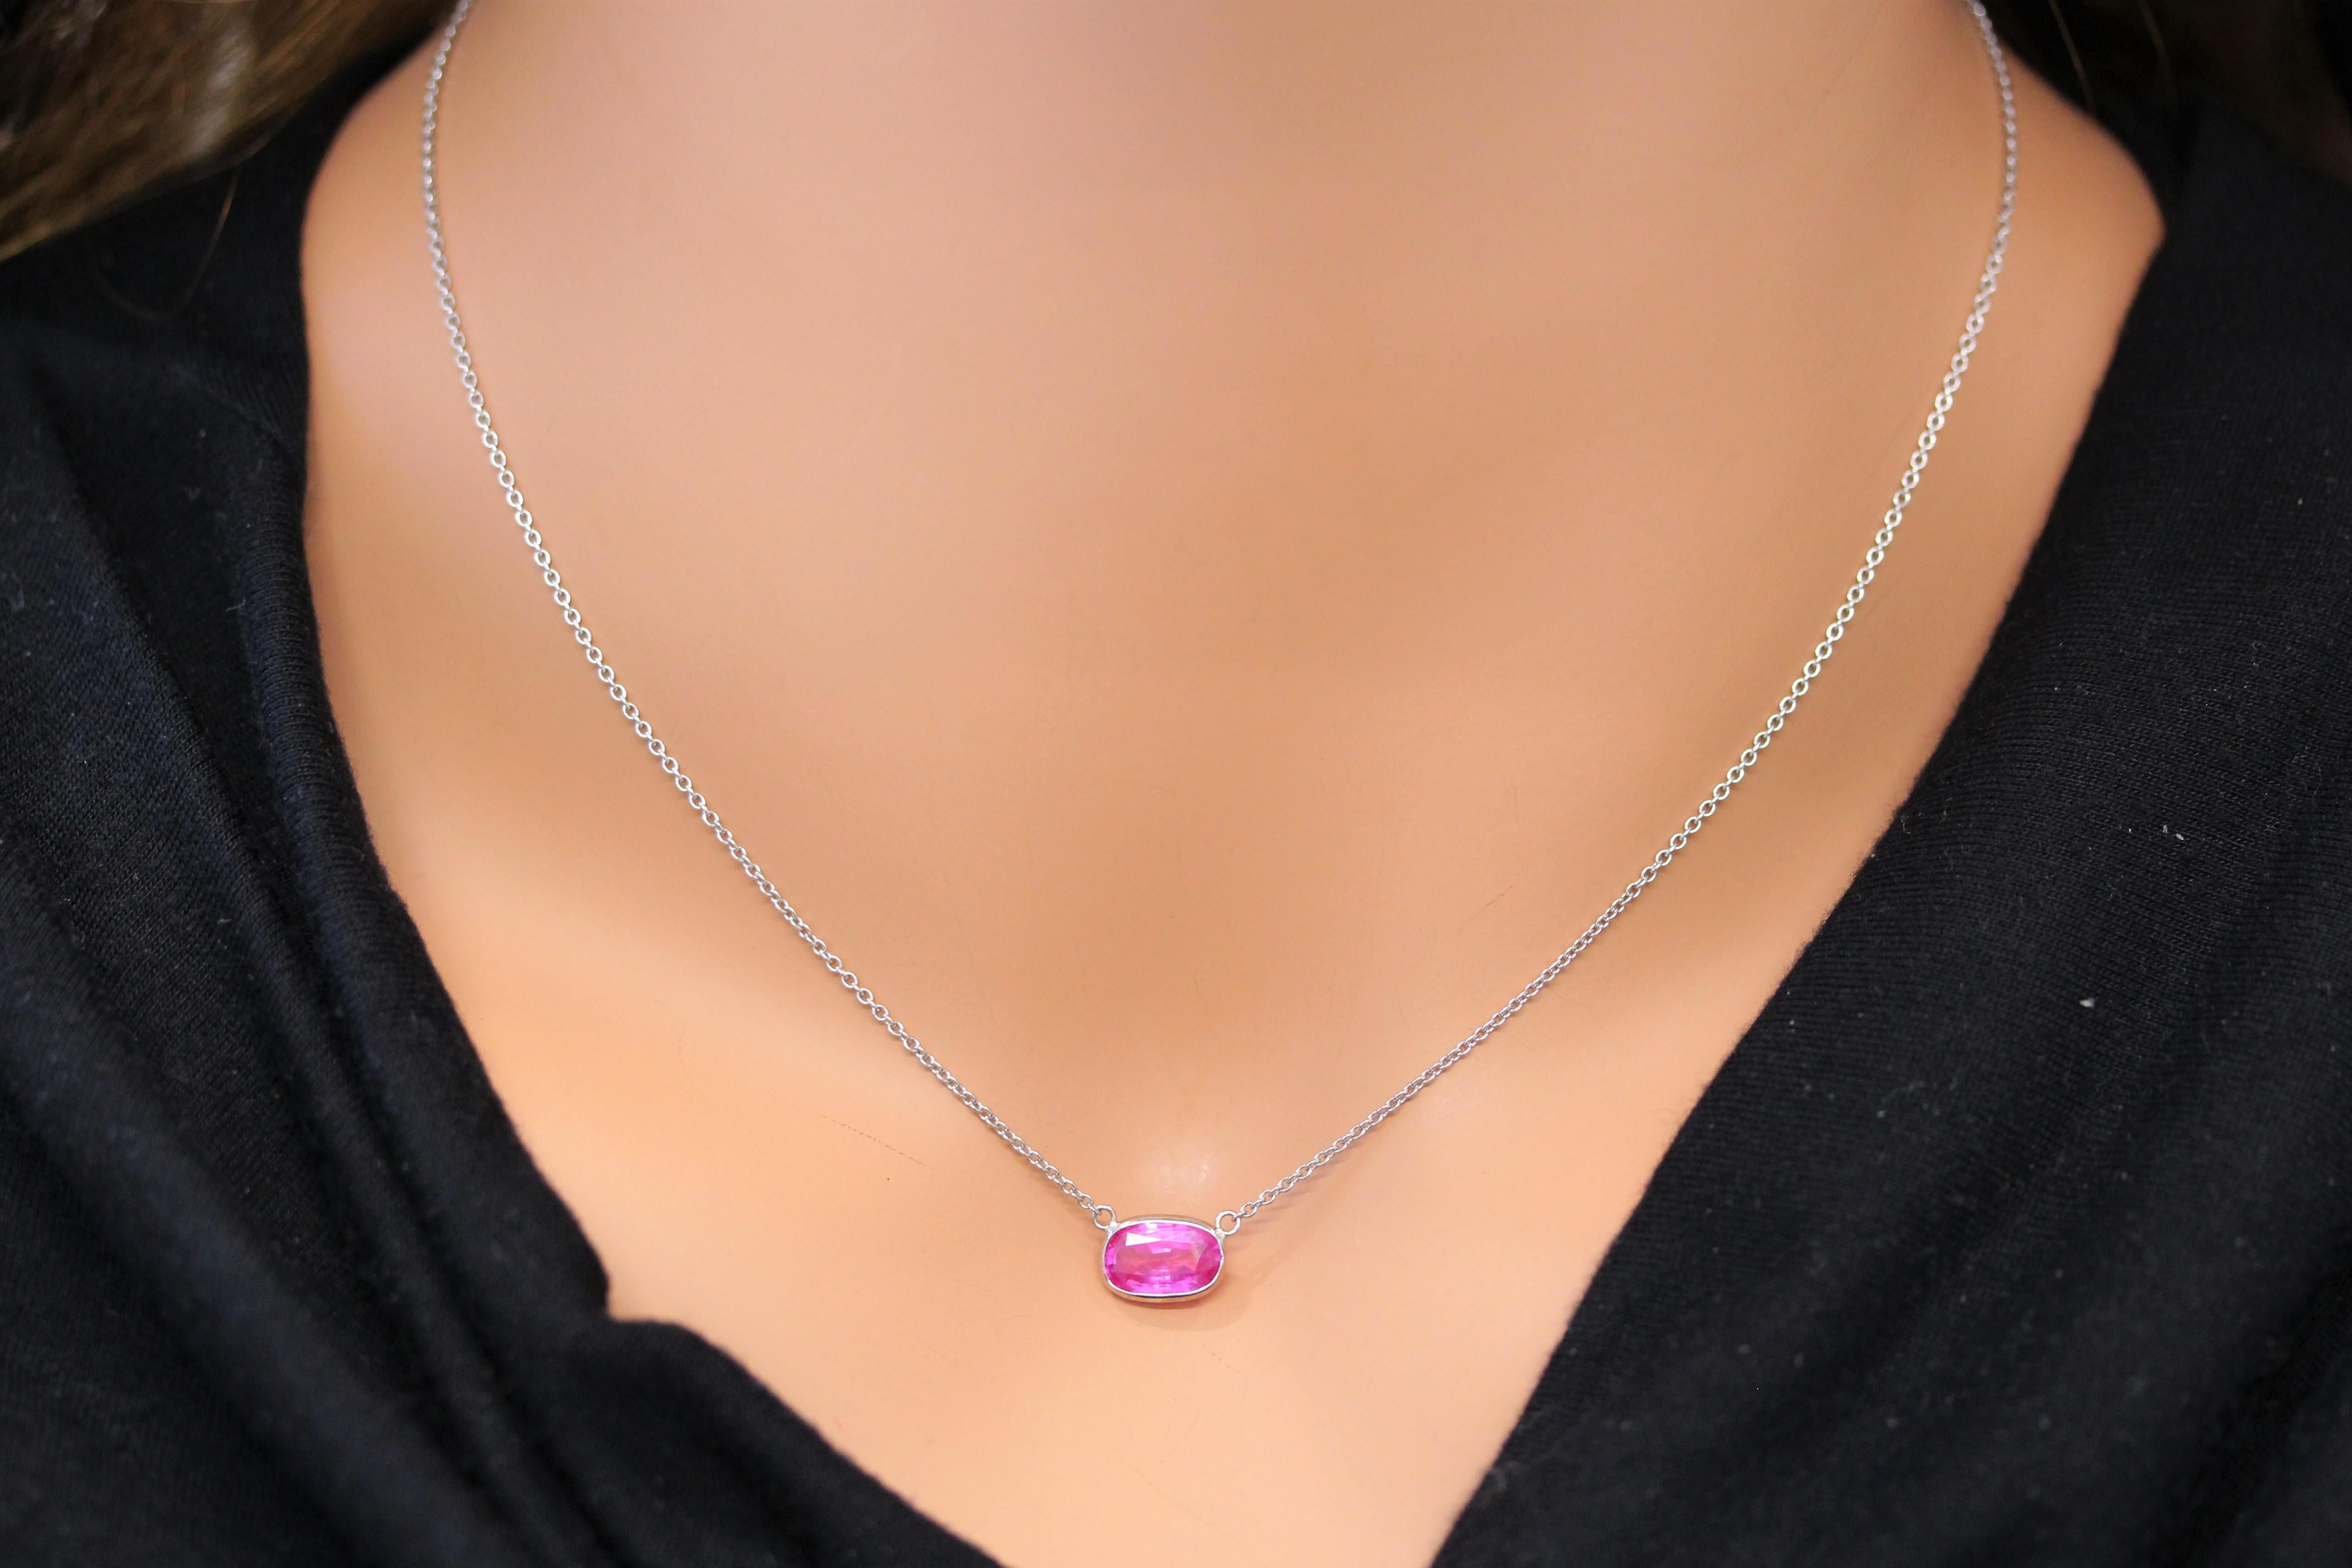 The necklace you're describing features a 2.15-carat cushion-cut pink sapphire set in a 14 karat white gold pendant or setting. Pink sapphires are known for their lovely color and durability, making them a great choice for jewelry. The cushion cut